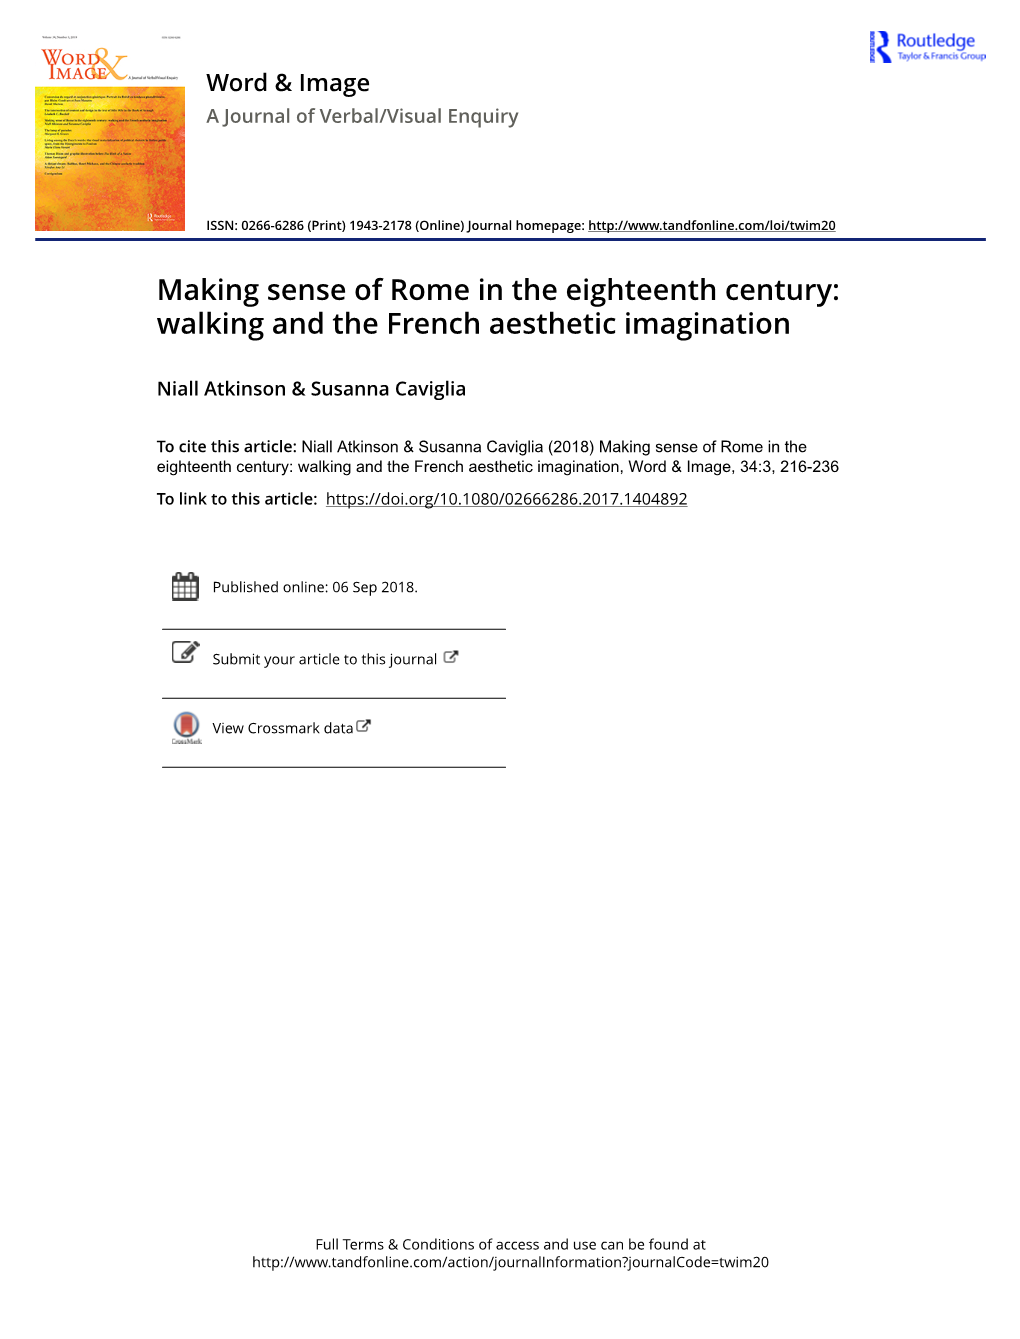 Making Sense of Rome in the Eighteenth Century: Walking and the French Aesthetic Imagination